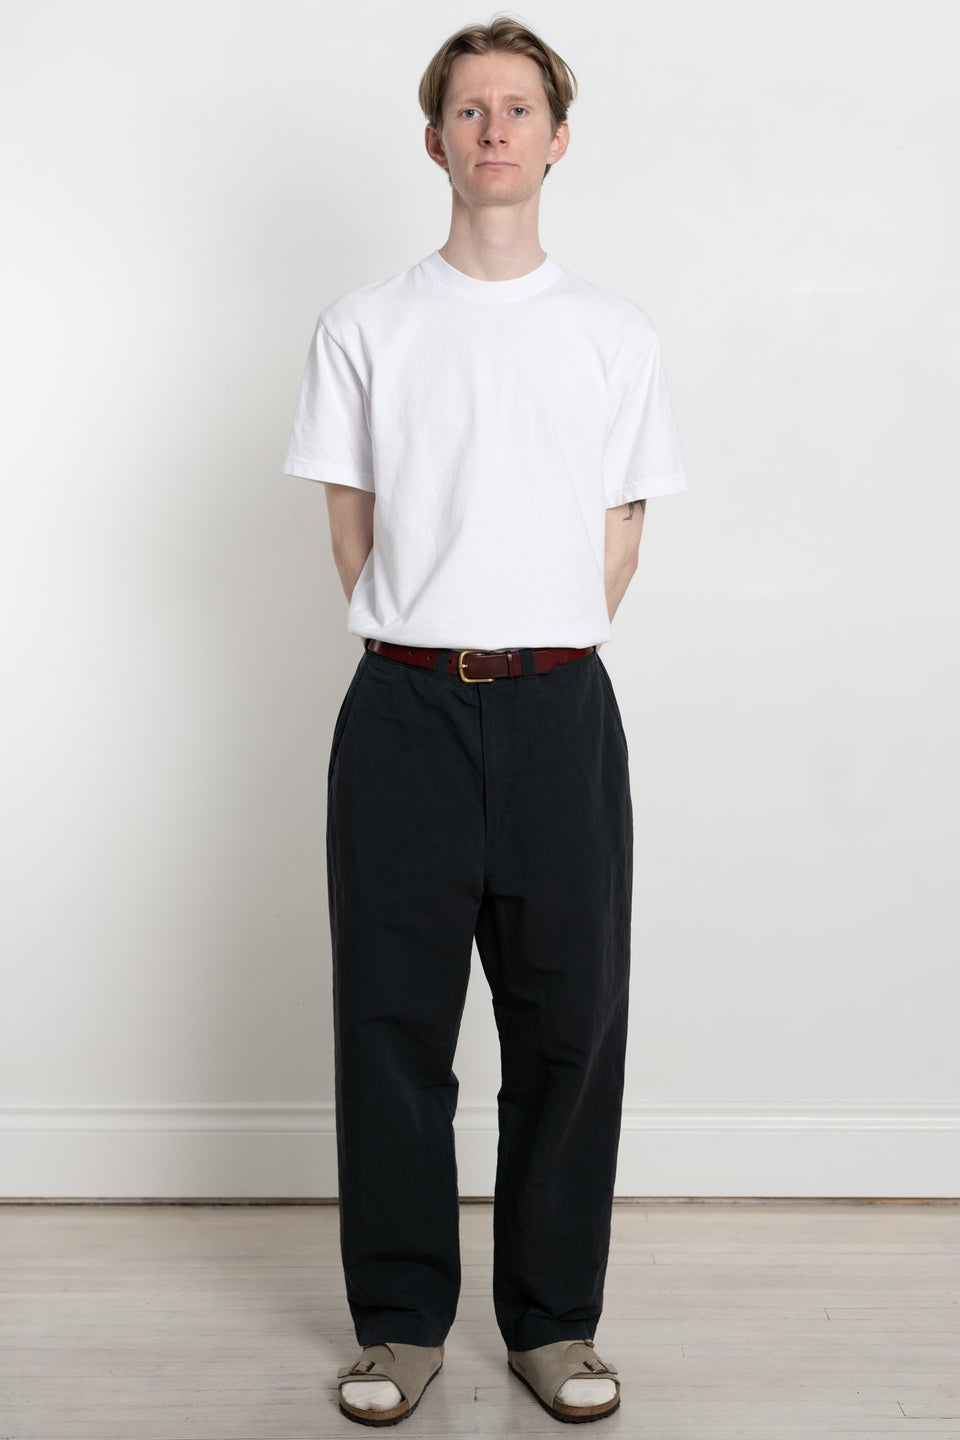 ENDS and MEANS spring summer 2024 SS24 24SS Men's Collection from Japan work chino charcoal